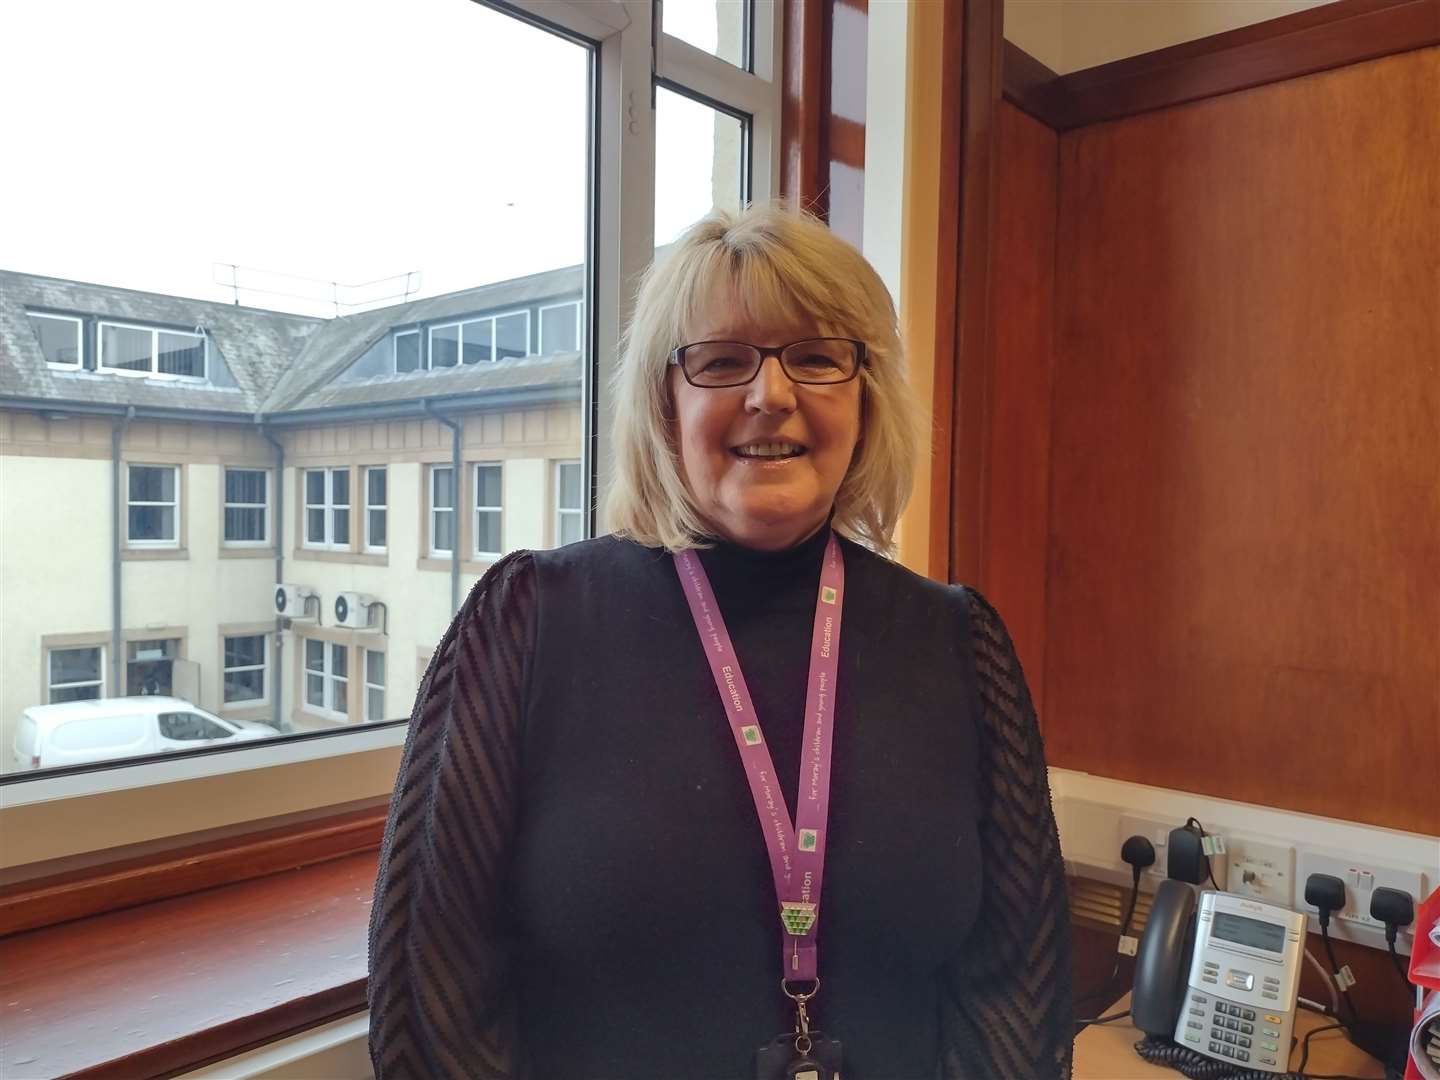 Moray Council head of education Vivienne Cross helped make the return to schools as smooth as possible.